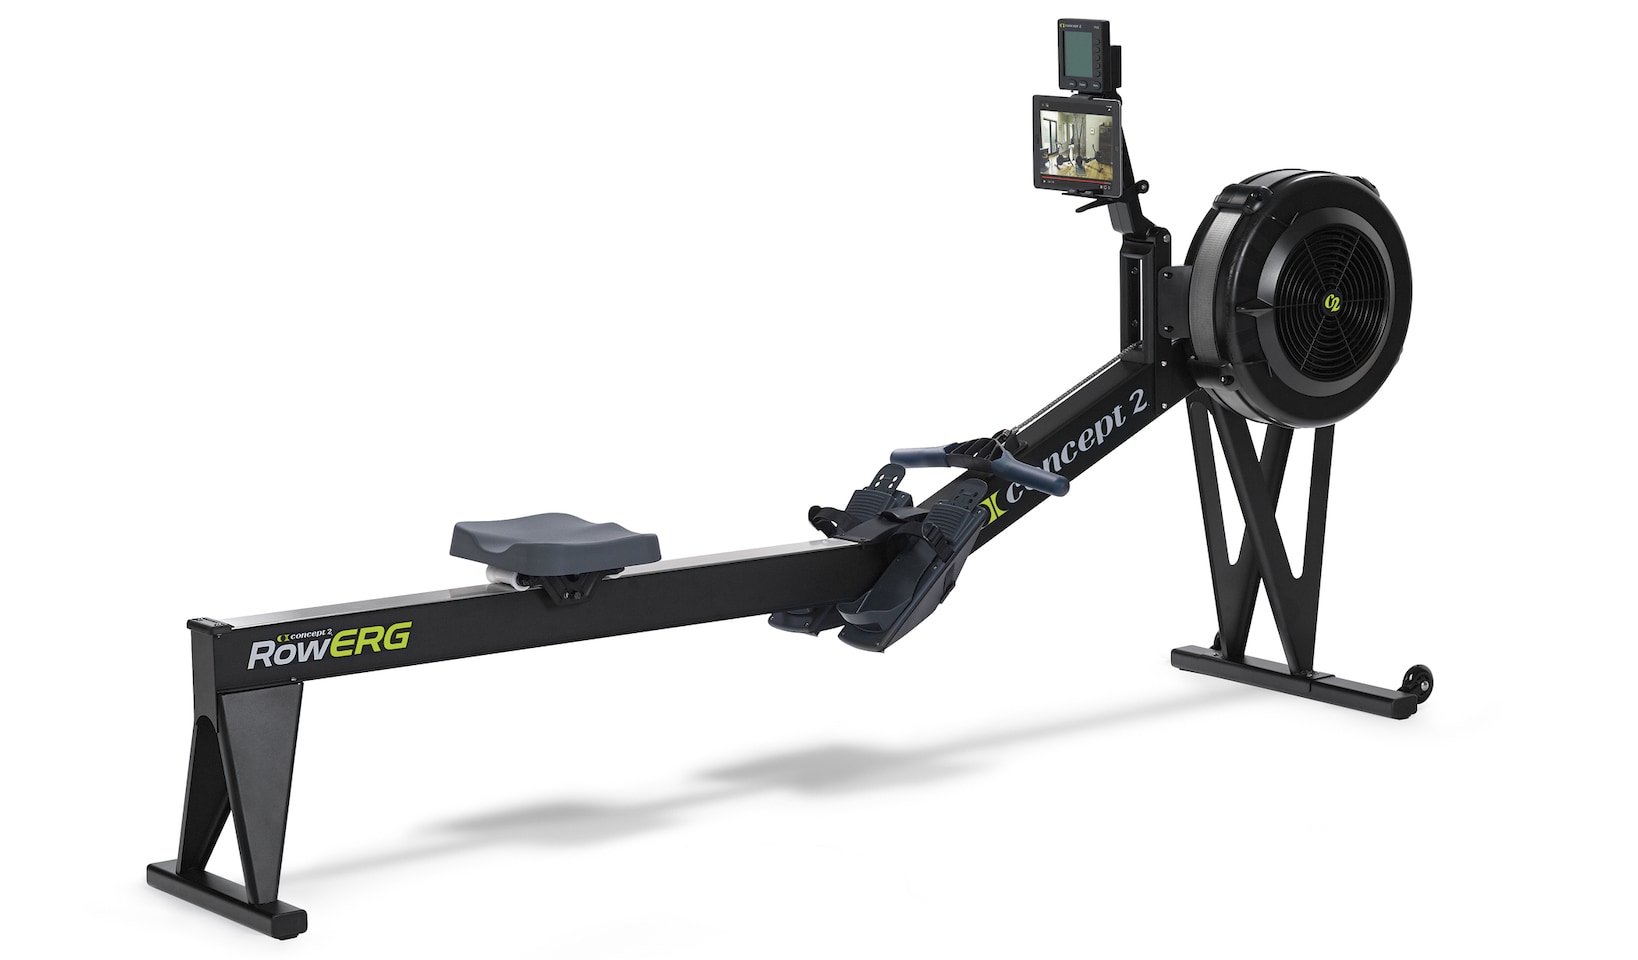 Concept2 Concept 2 Model D2 Rower Rowing Machine ERG with PM3 Monitor . E,C,5,4,2 